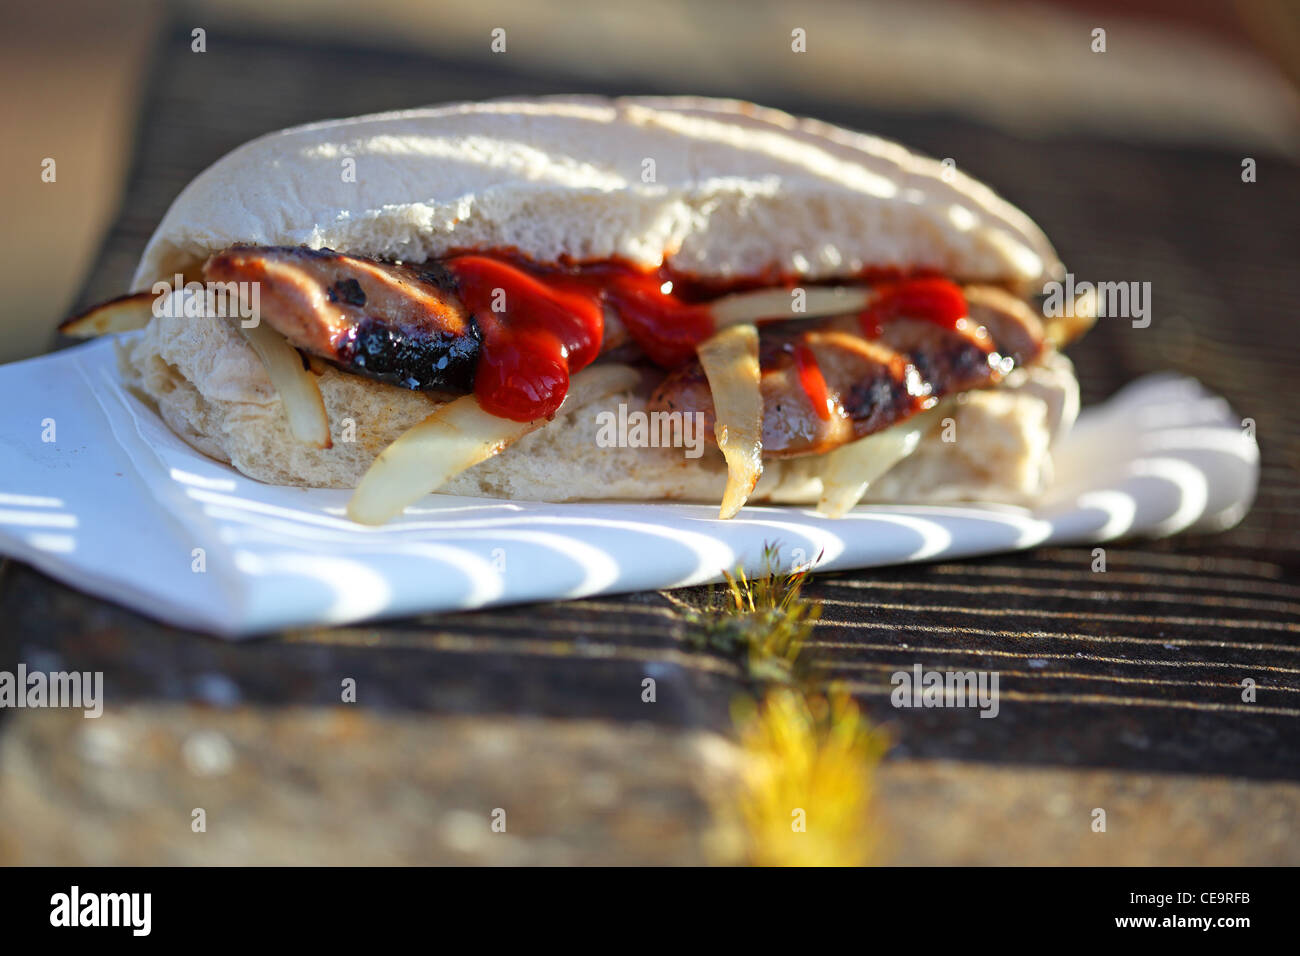 sandwich sausage barm eating on the street Stock Photo